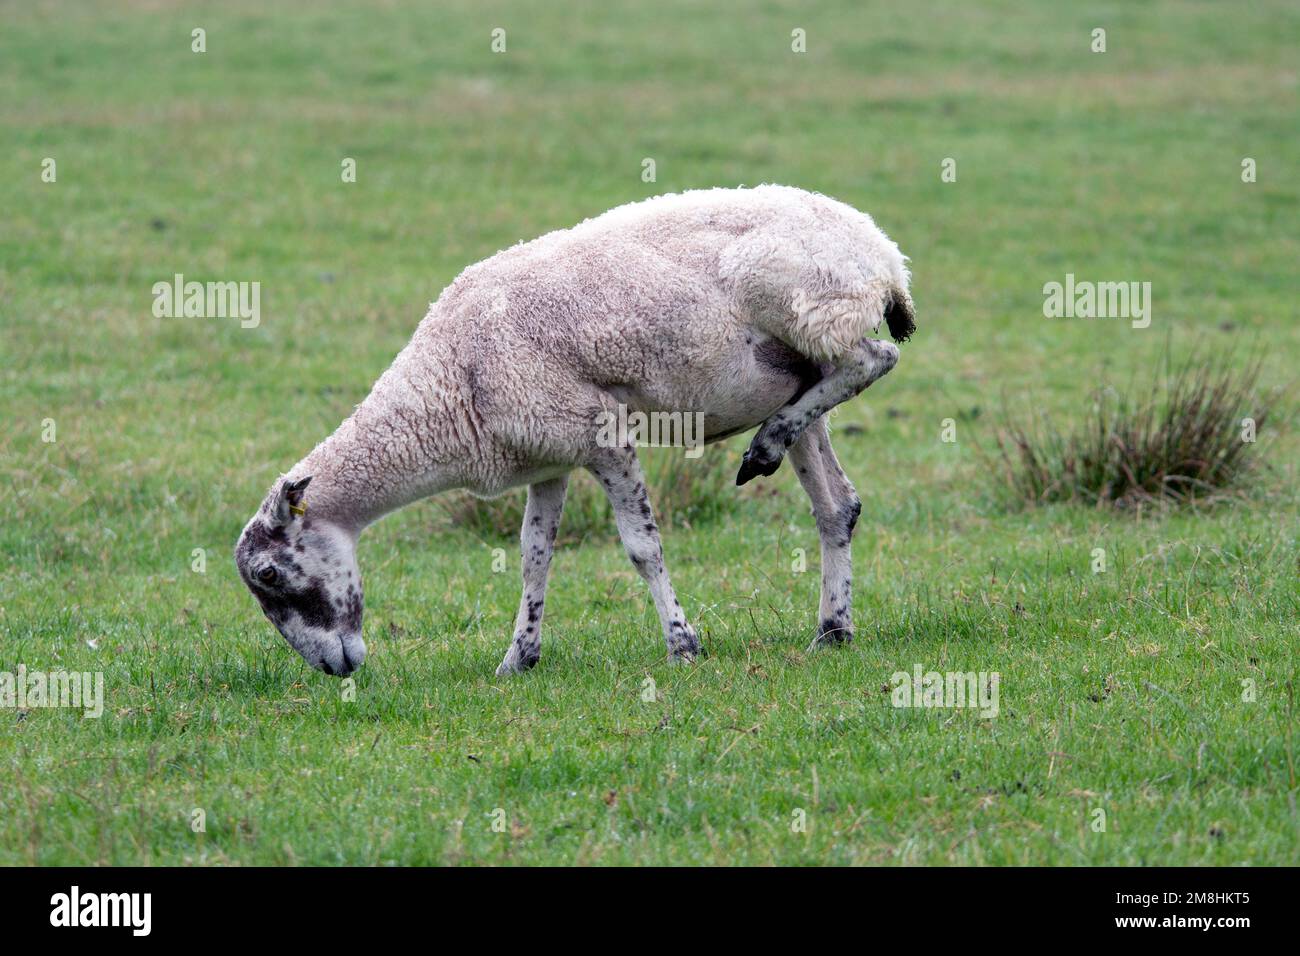 Foot health problems with sheep Stock Photo